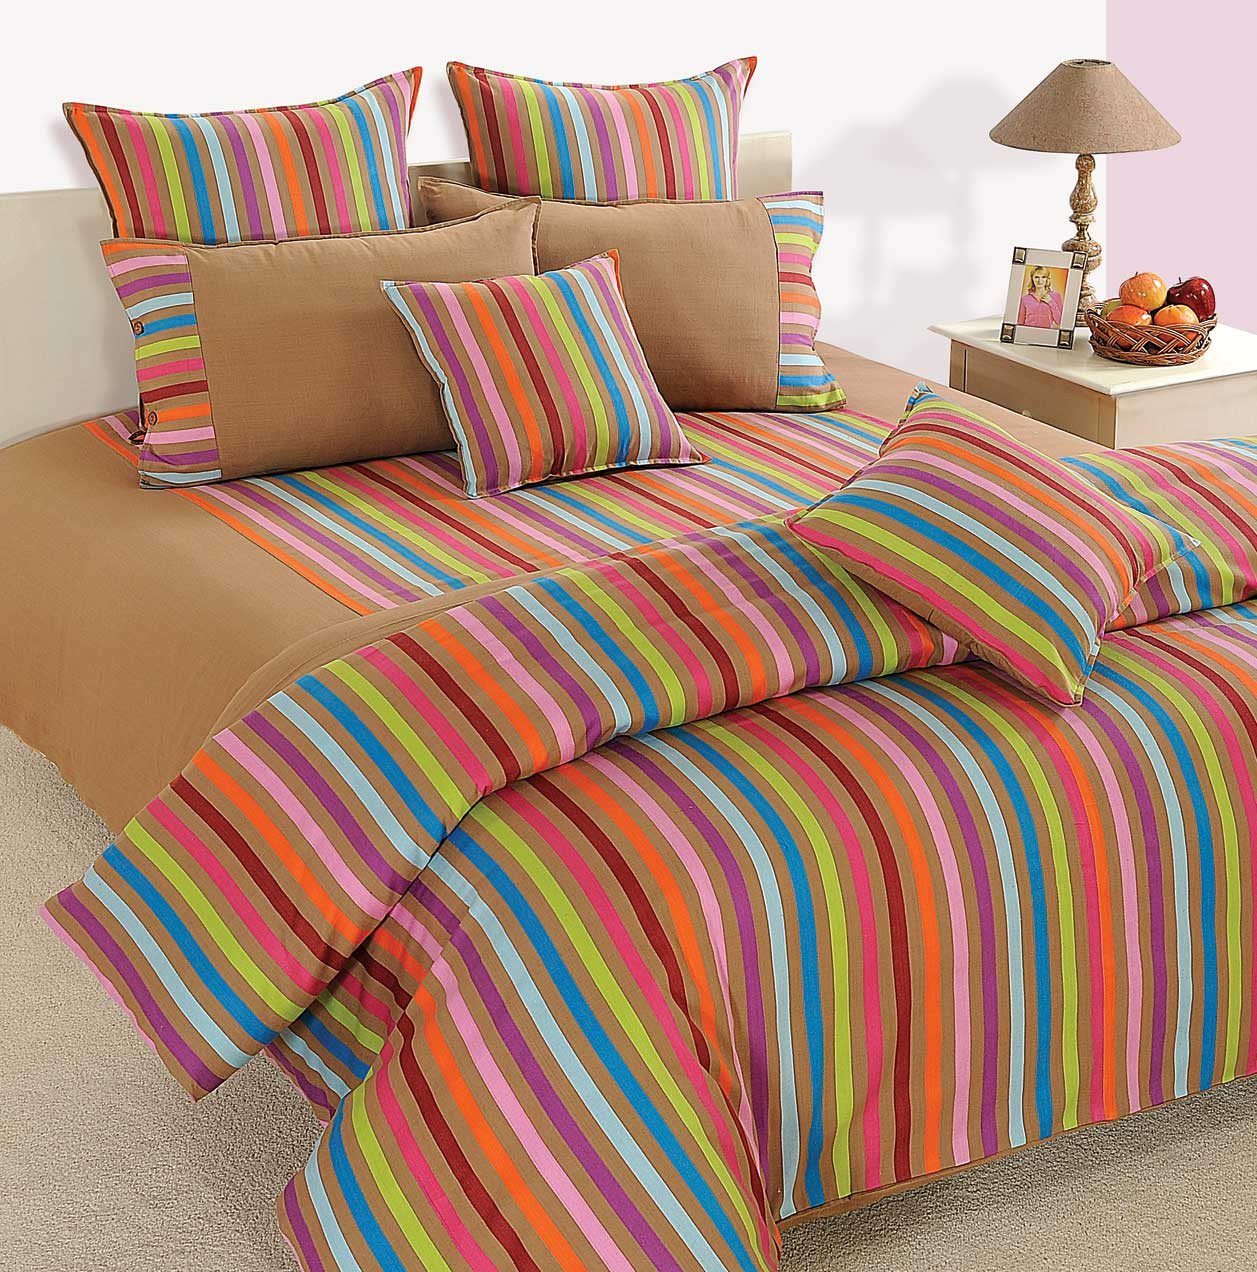 Canopus Multi Color Striped Duvet Cover Flickdeal New Zealand